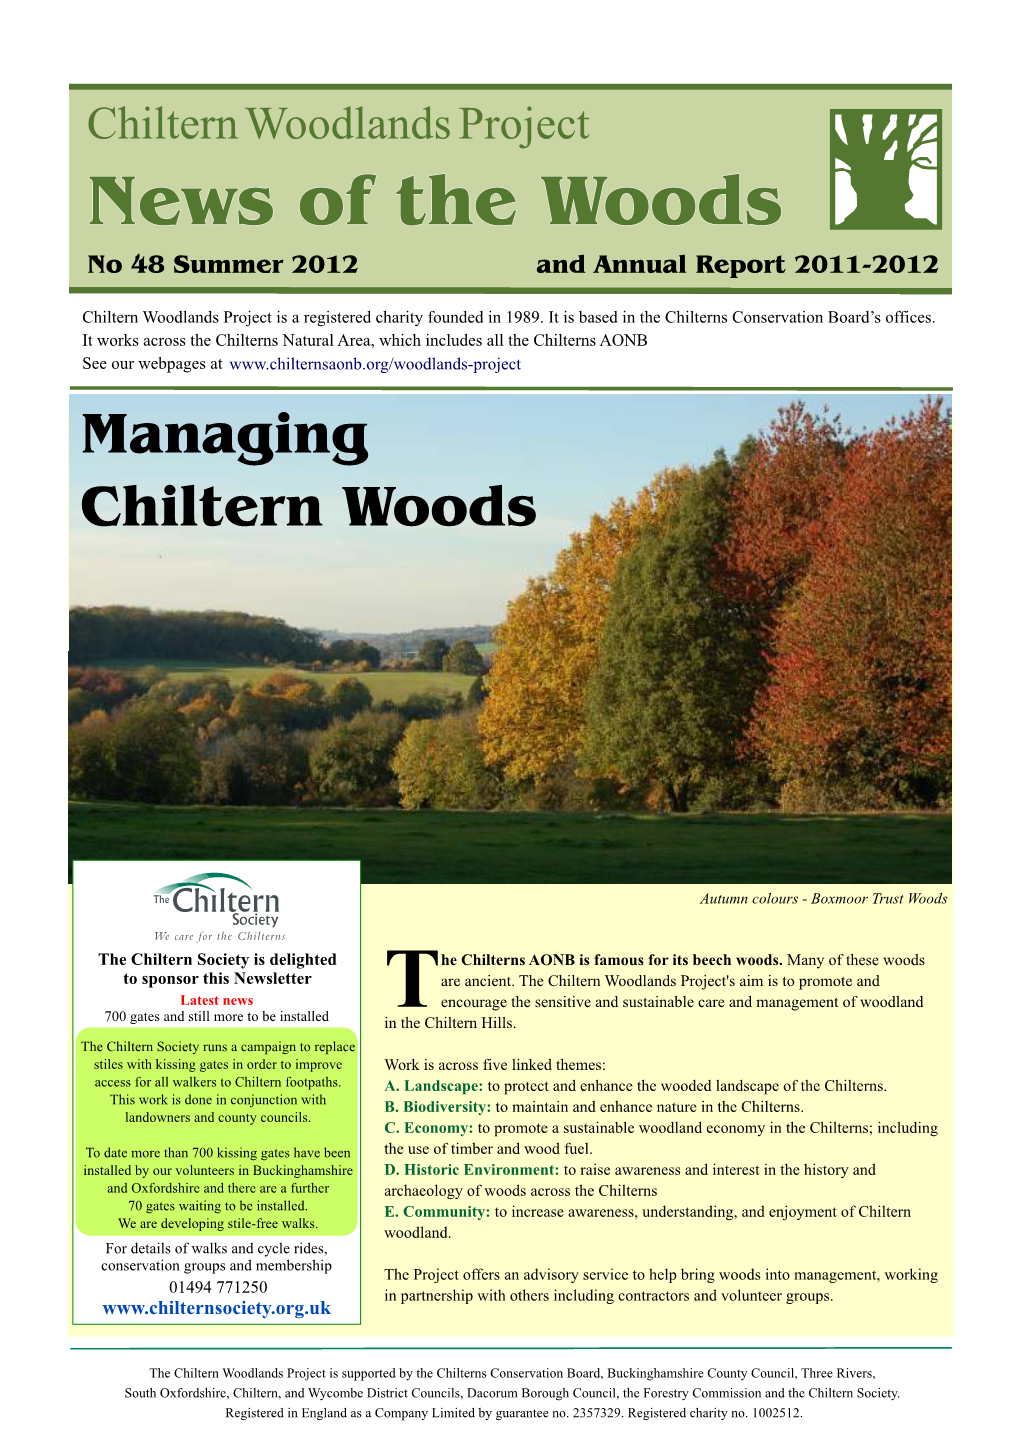 Chiltern Woodlands Project News of the Woods No 48 Summer 2012 and Annual Report 2011-2012